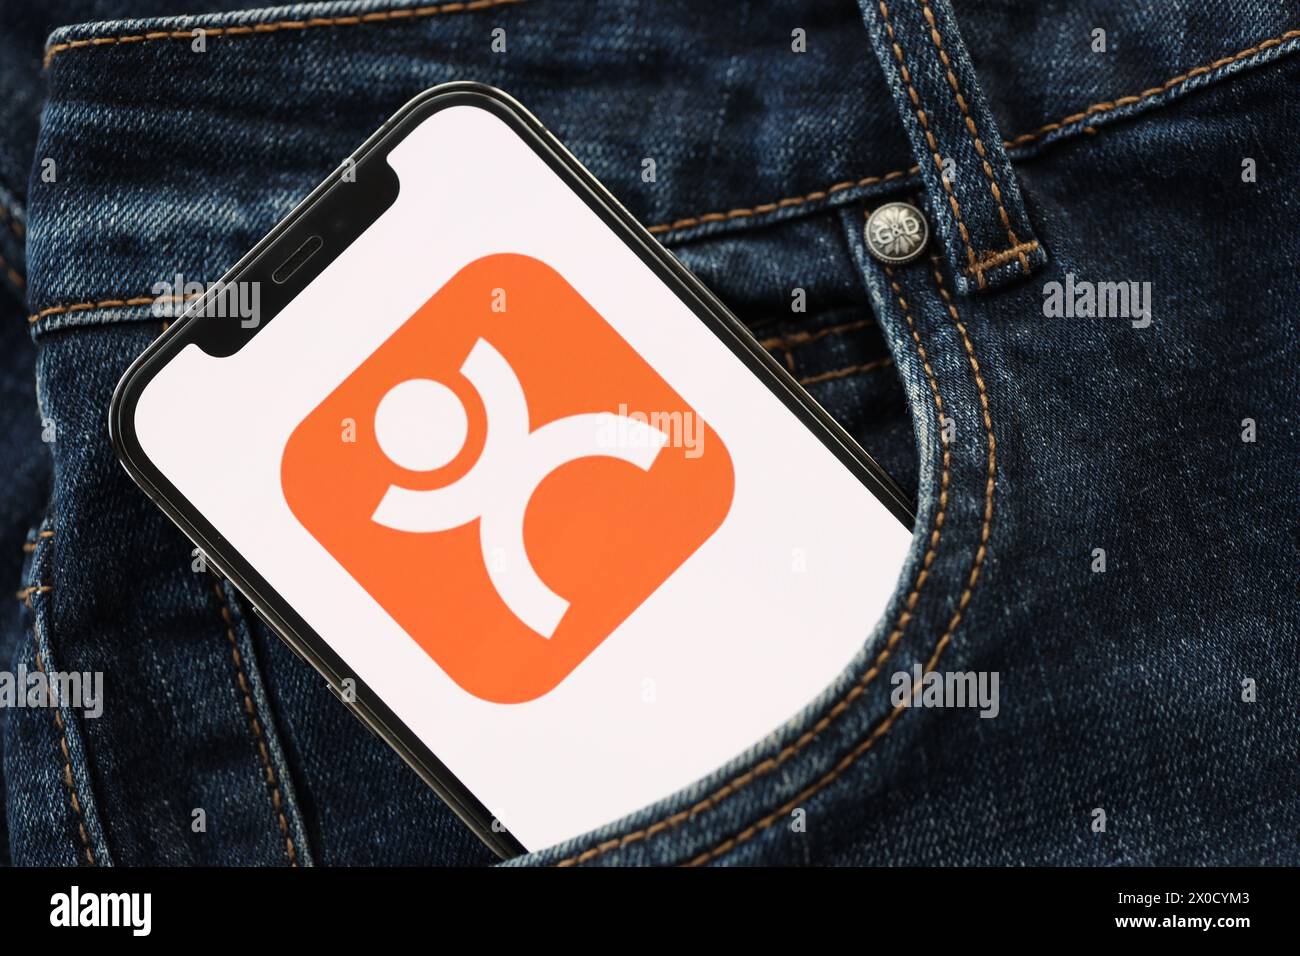 KYIV, UKRAINE - APRIL 1, 2024 Dianping platform icon on smartphone display screen in jeans pocket. iPhone display with app logo hide in fashionable denims pocket close up Stock Photo